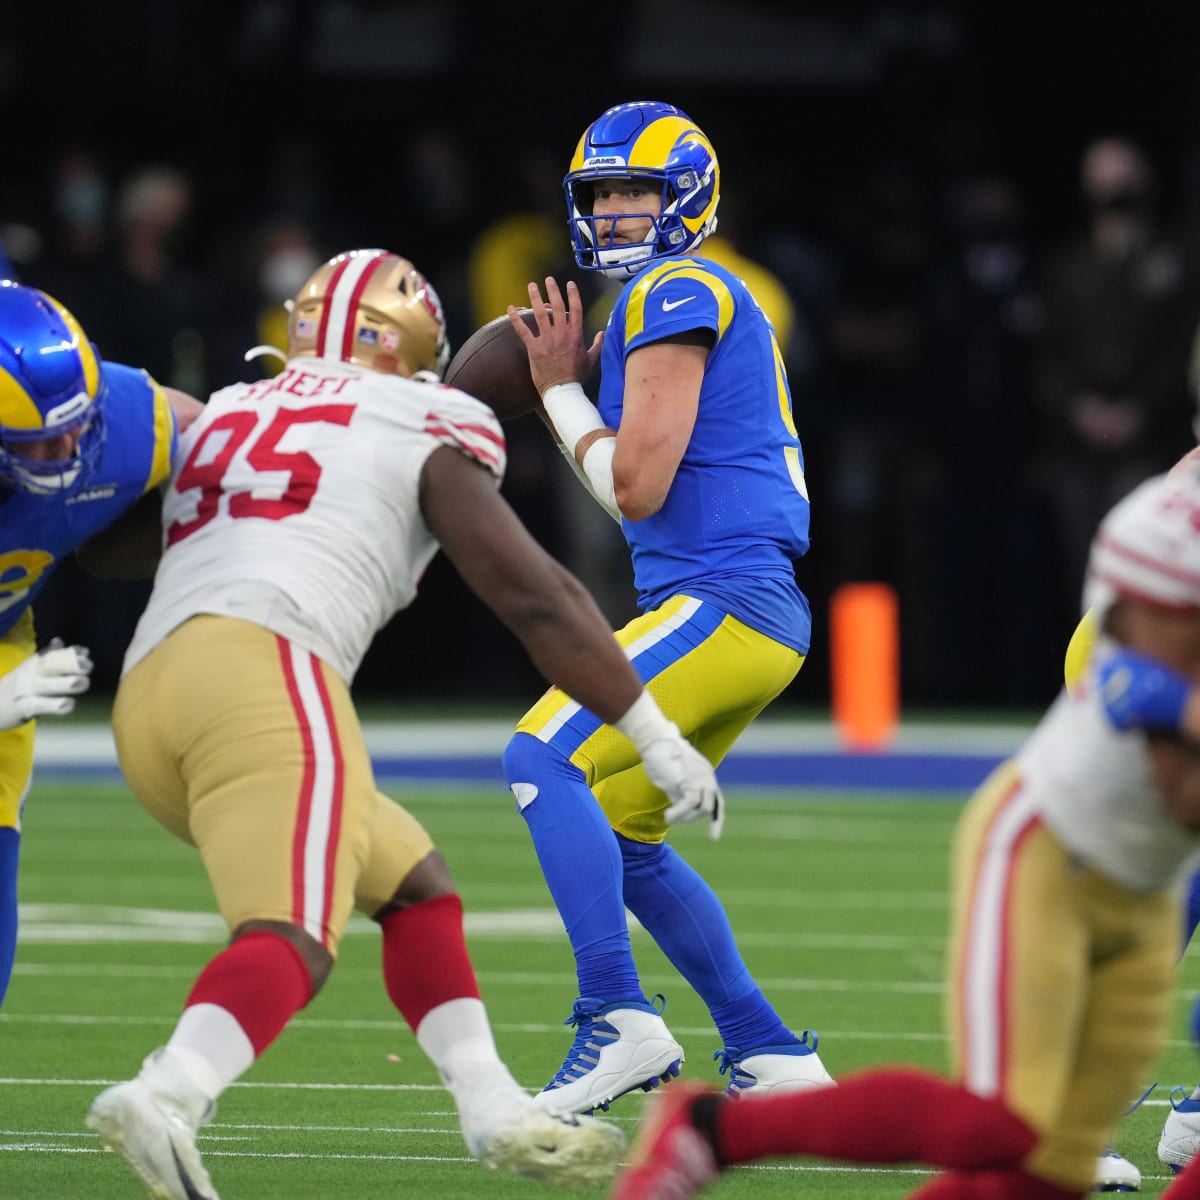 Rams vs. 49ers final score: Rams advance to Super Bowl with 20-17